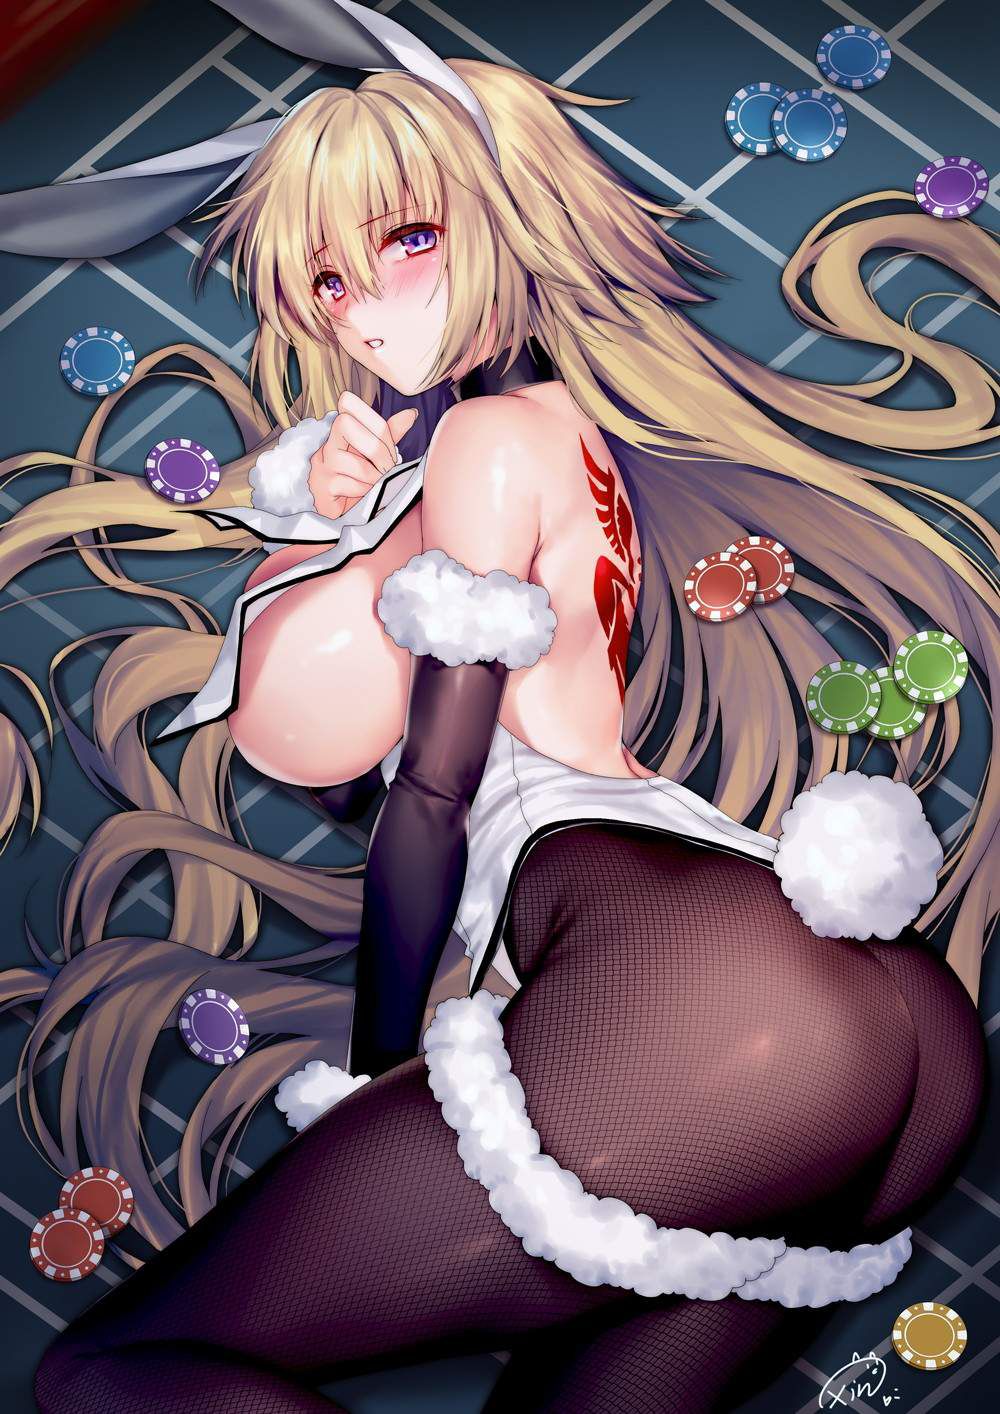 Get nasty and obscene images of bunny girls! 12